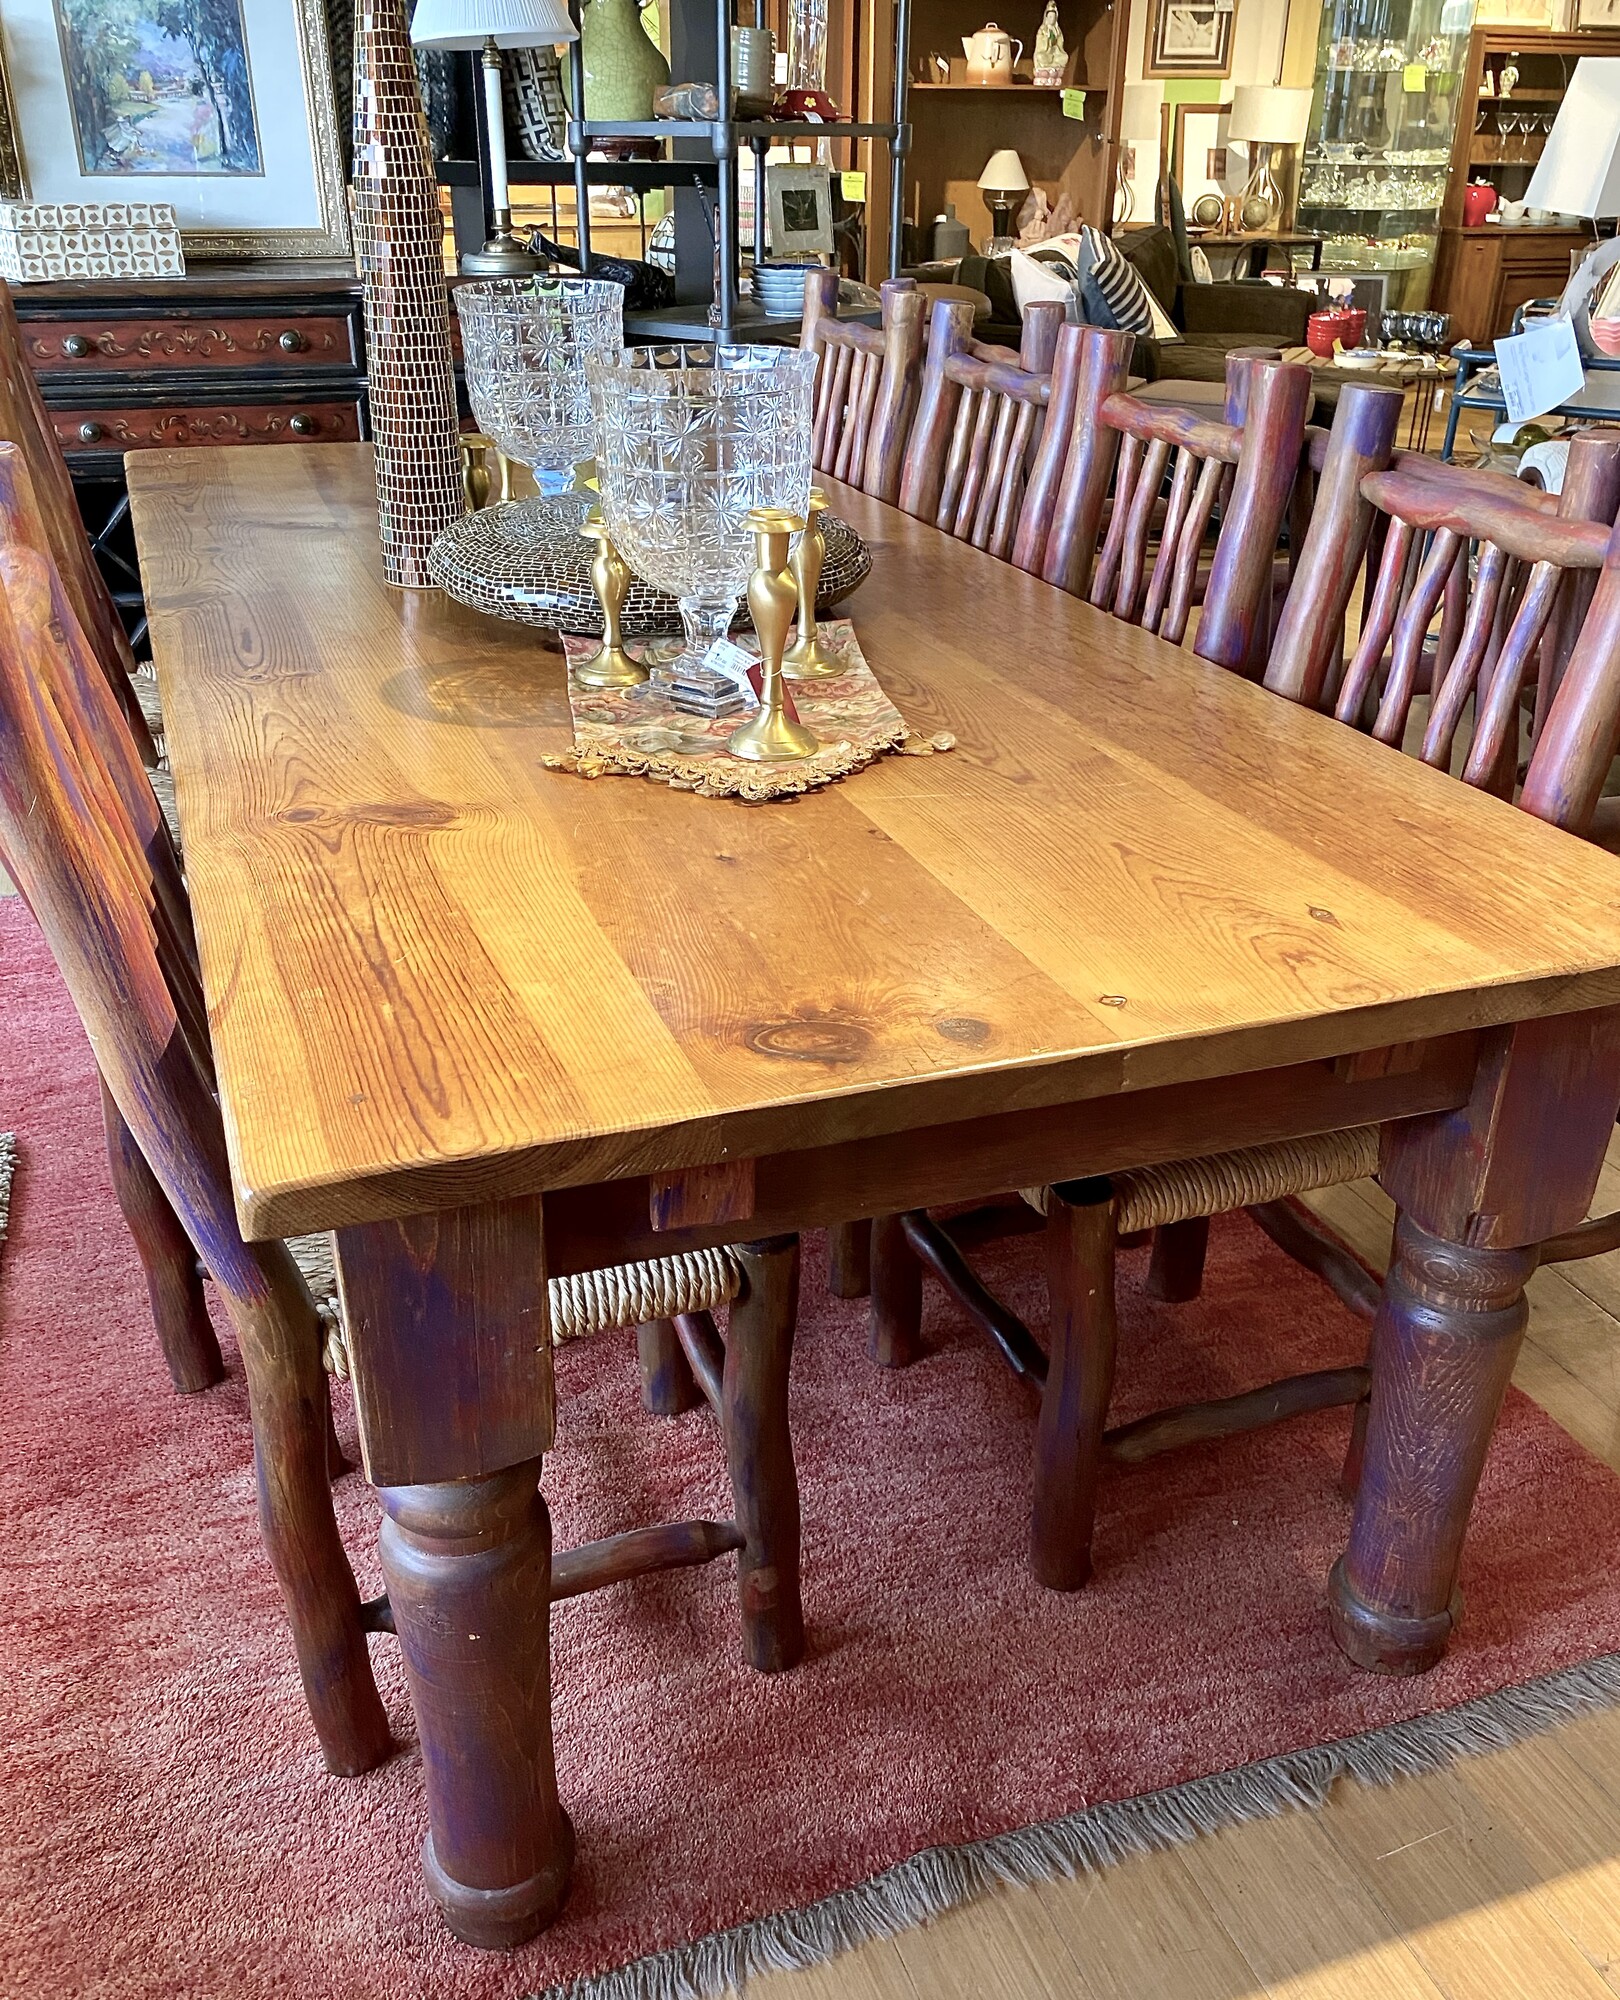 Dining Table, 8 Side Chairs,2 Armchairs,  2-12\" Leaves, Rustic, 13 Pcs

Without leaves, table is 8' long, with 2 leaves extends to
12'.